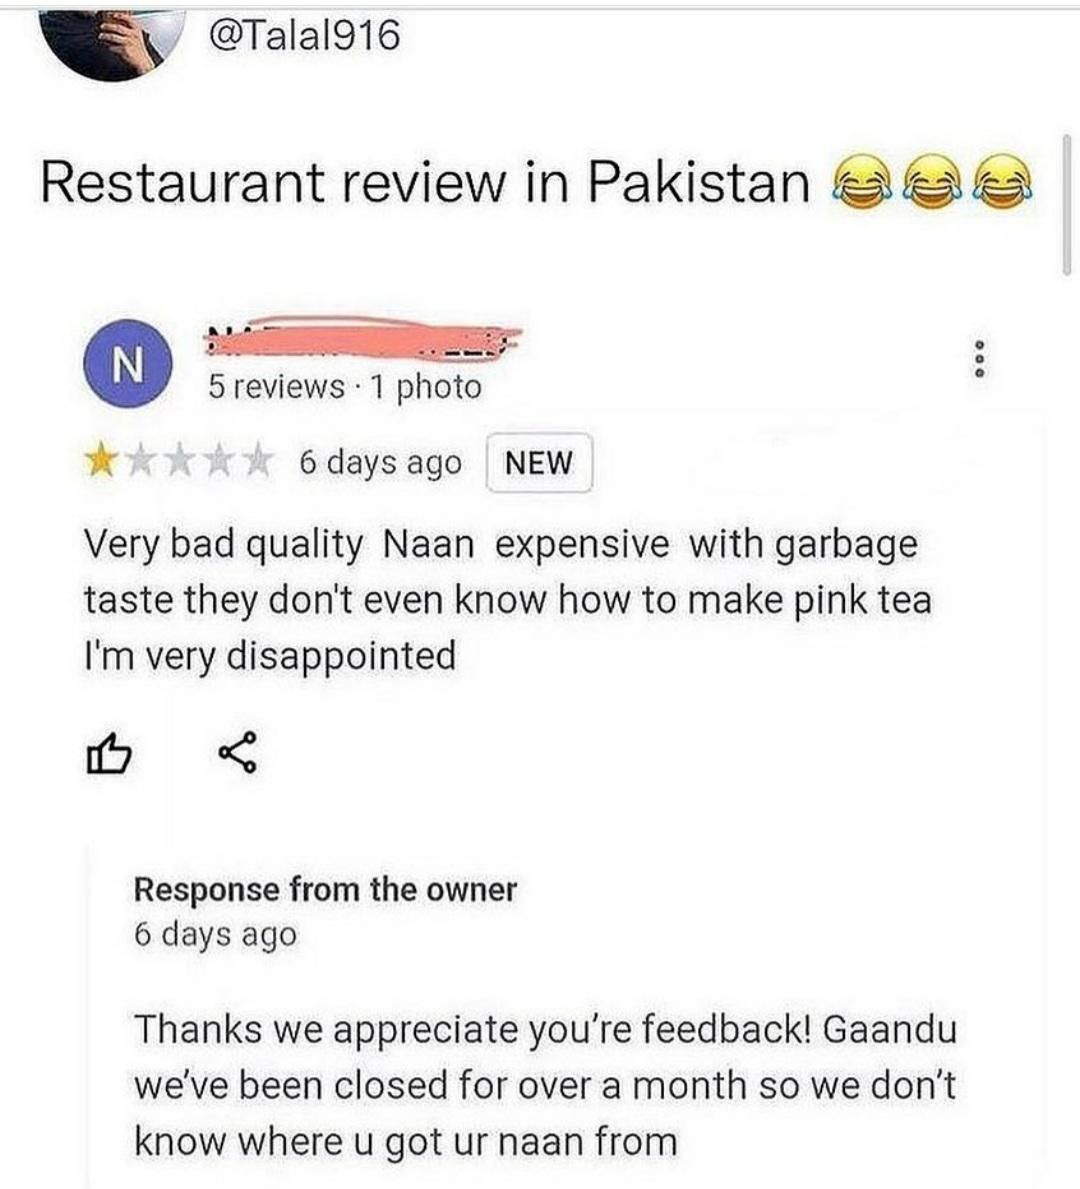 Its the "Gandu" for me